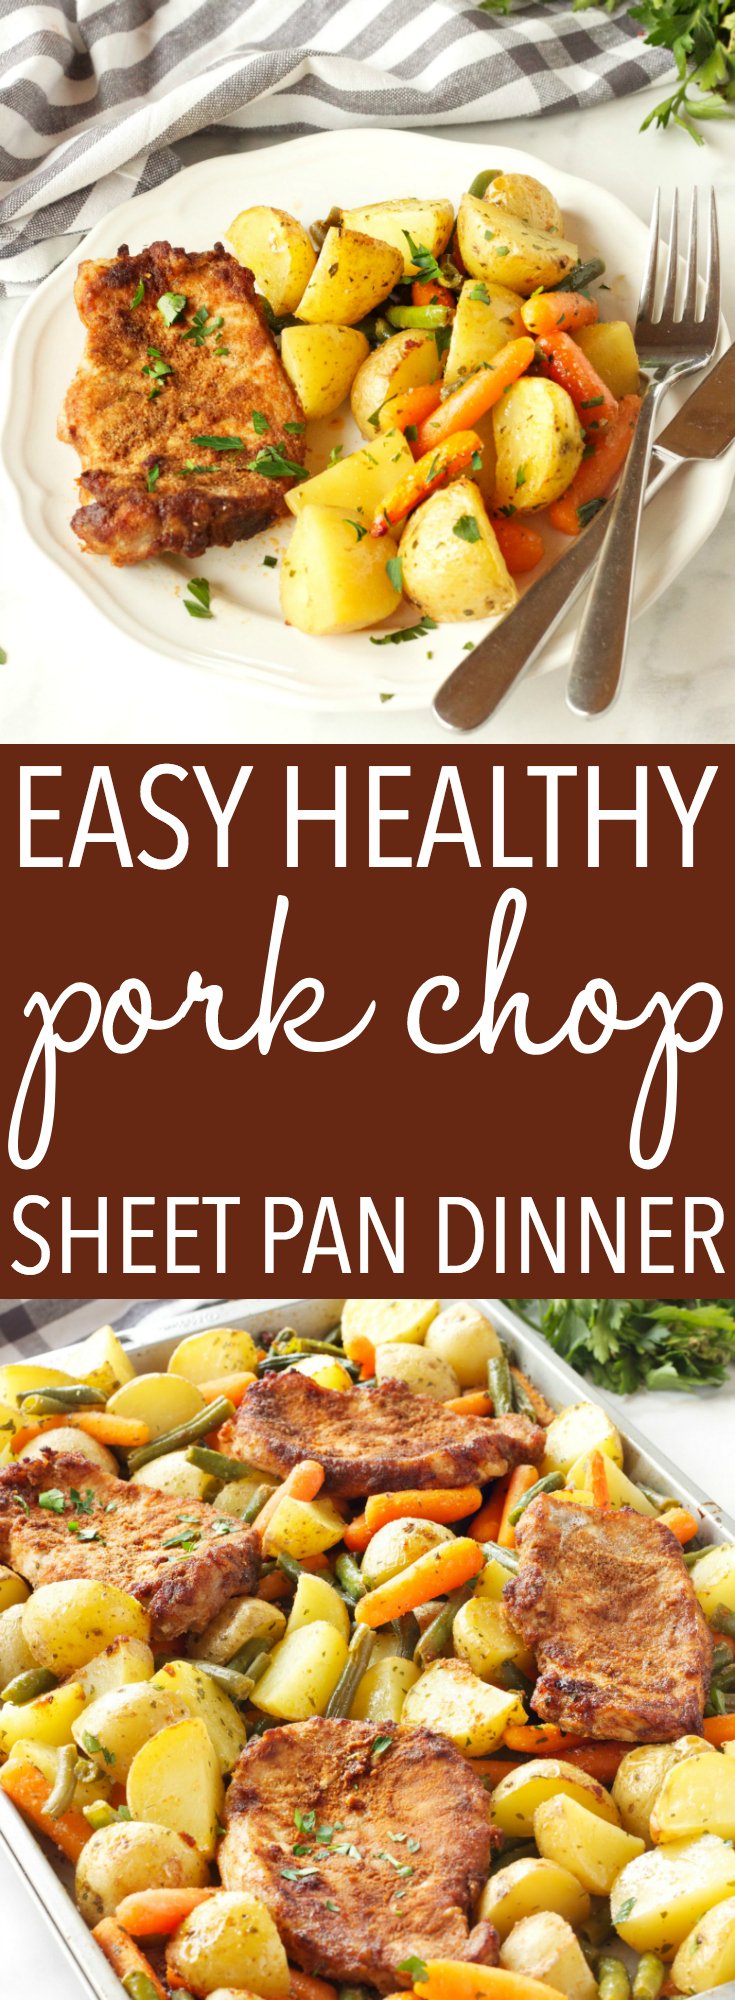 This Easy Pork Chop Sheet Pan Dinner is the perfect weeknight meal idea for busy families - just a few simple ingredients and you've got a whole meal on one pan! Recipe from thebusybaker.ca! #sheetpandinner #easyporkchops #bestporkchops via @busybakerblog